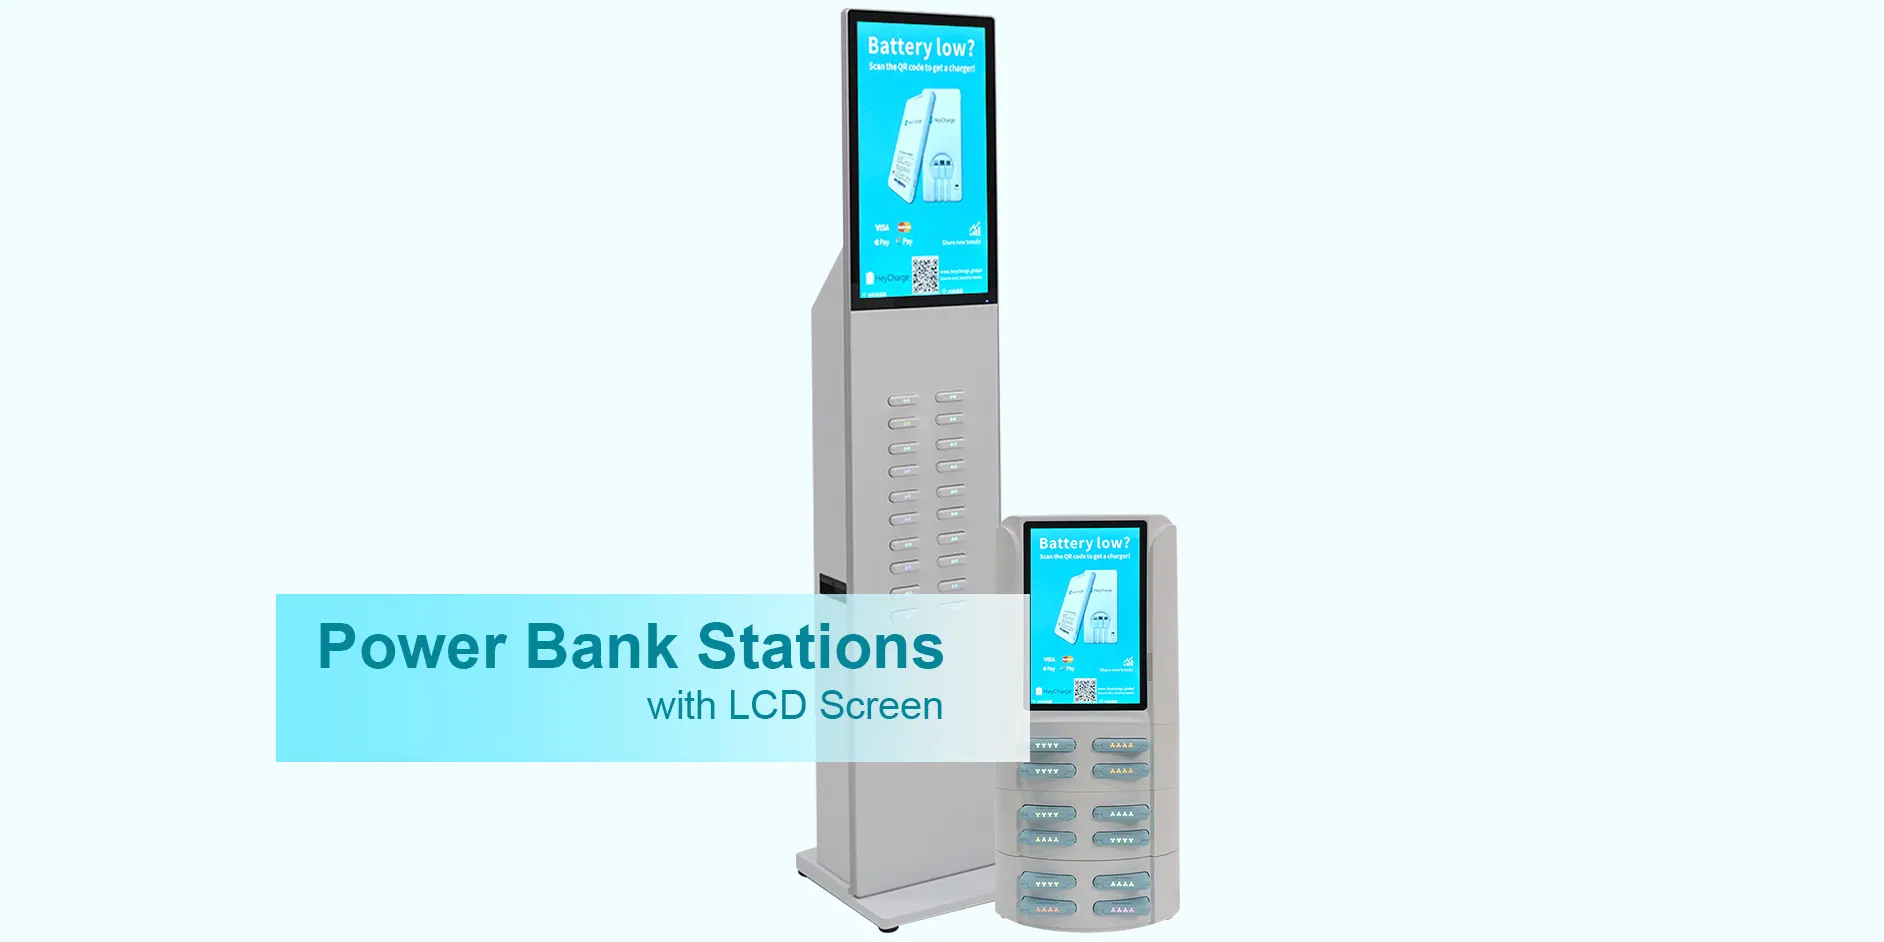 power bank stations with LCD ads screen